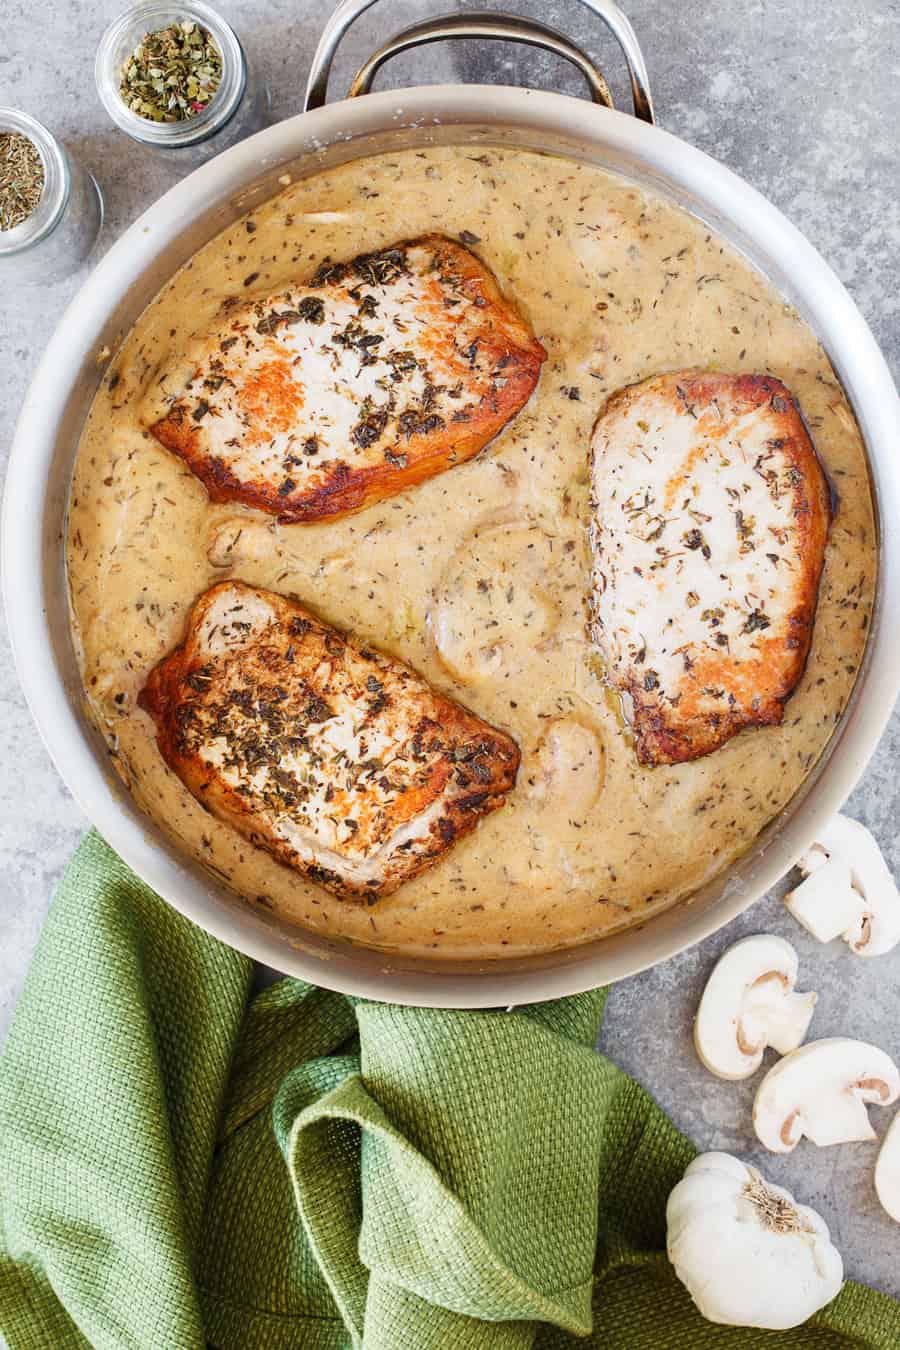 Creamy and Delicious Browned Butter Pork Chops with Mushrooms